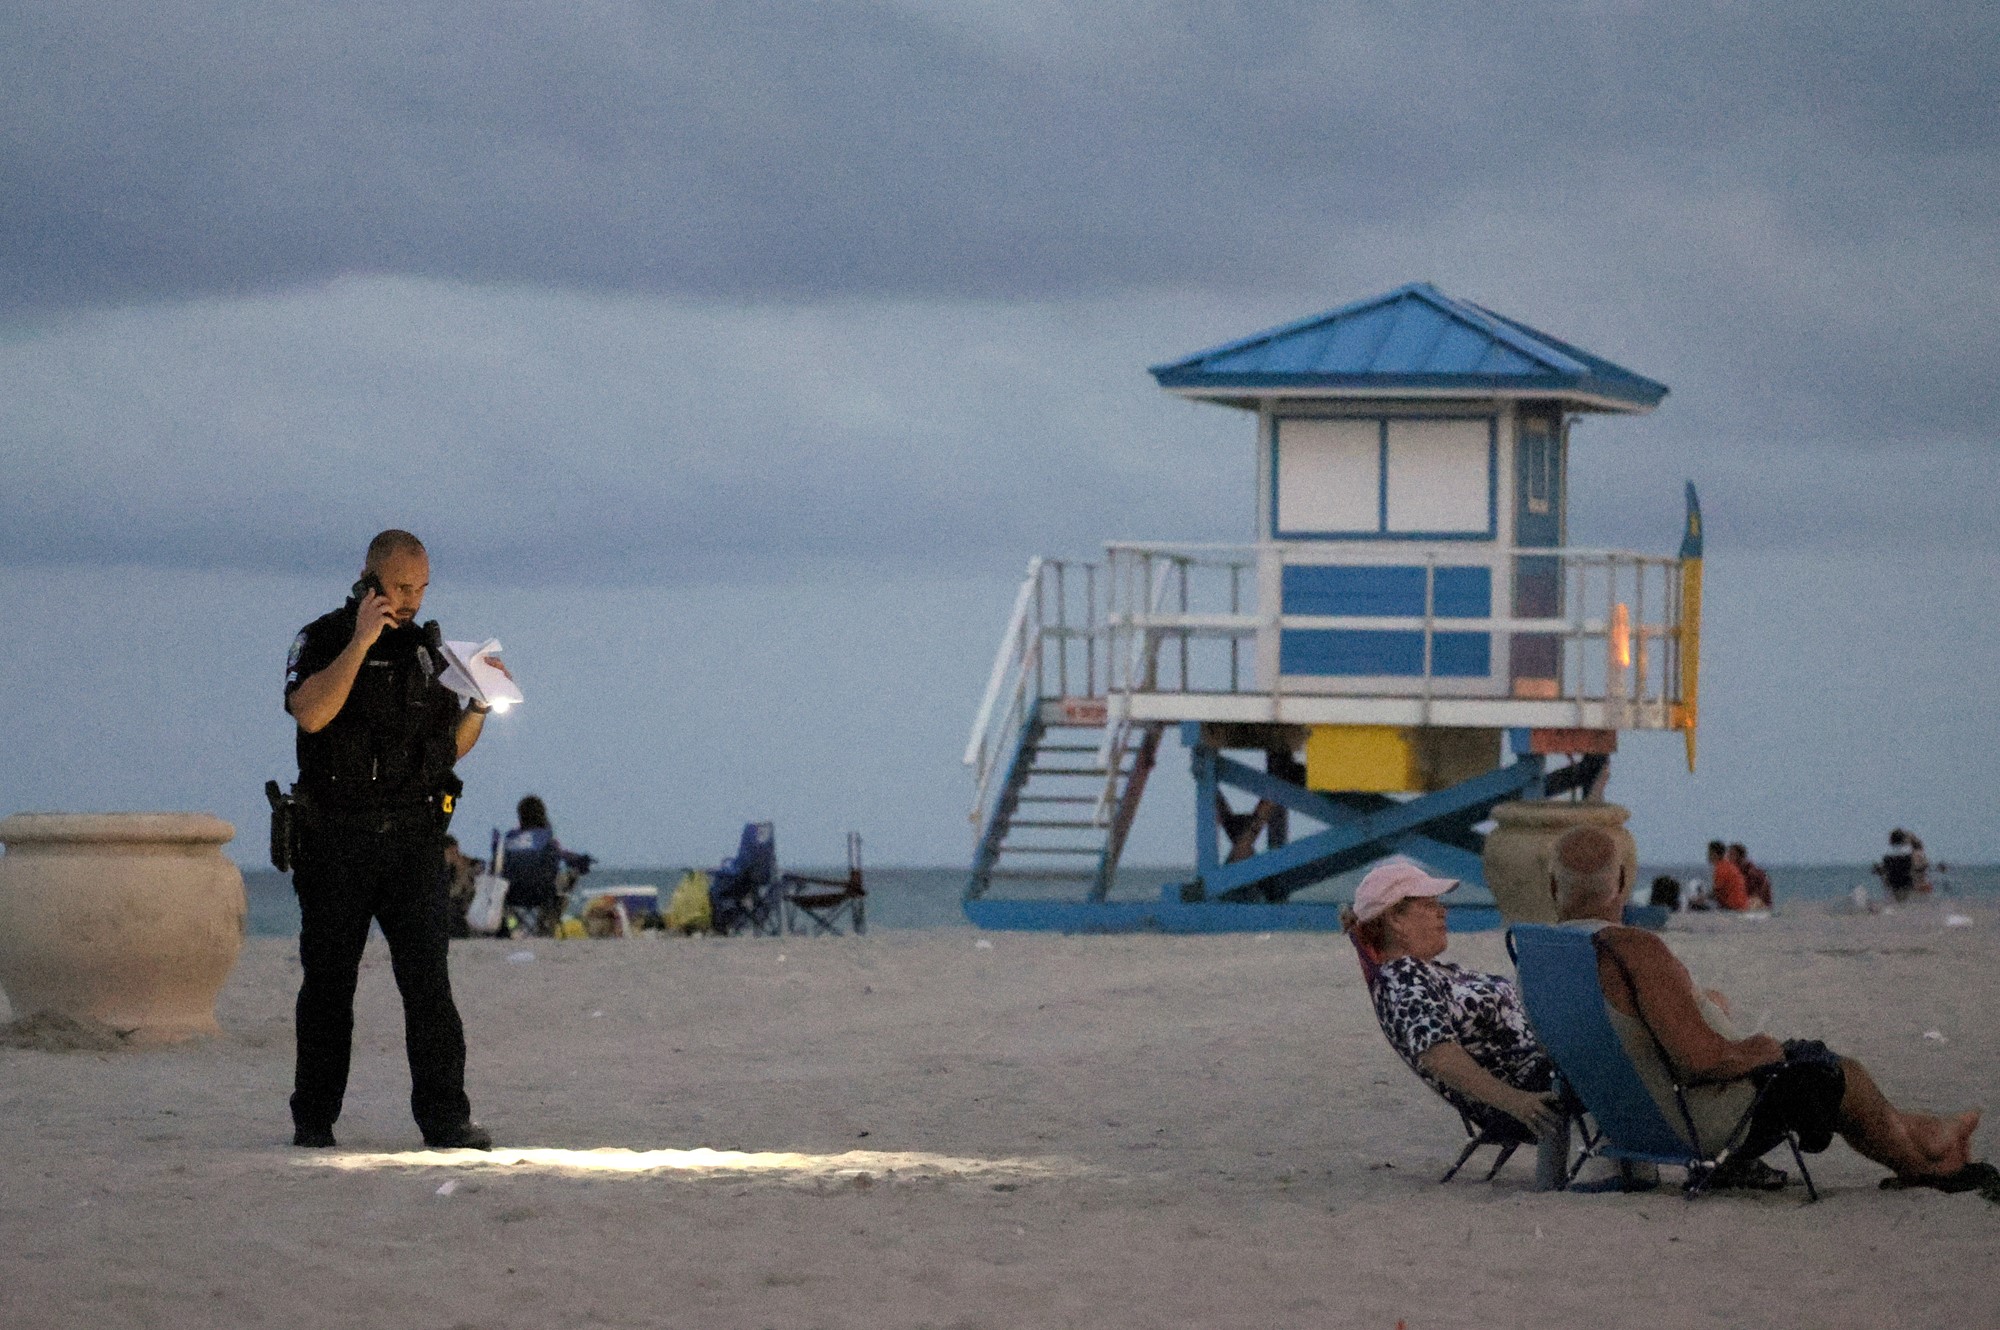 A police officer holding a torch on a beach in the evening, near beachgoers